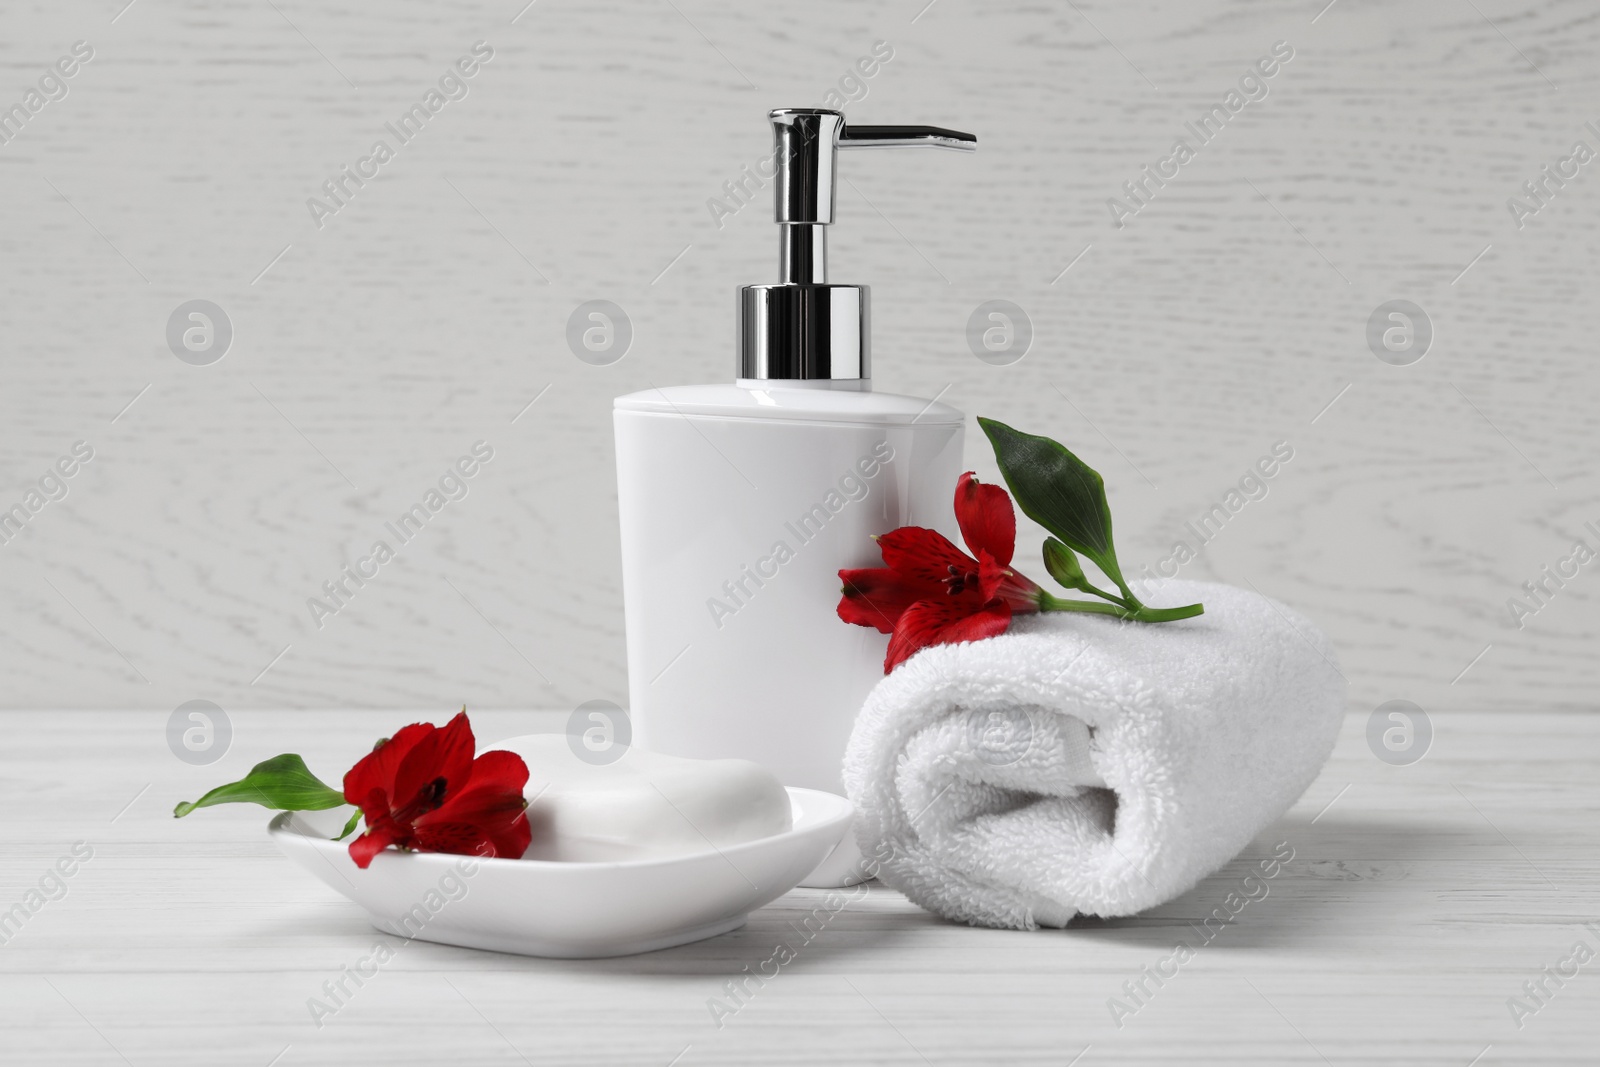 Photo of Dish with soap bar, dispenser and terry towel on white wooden table